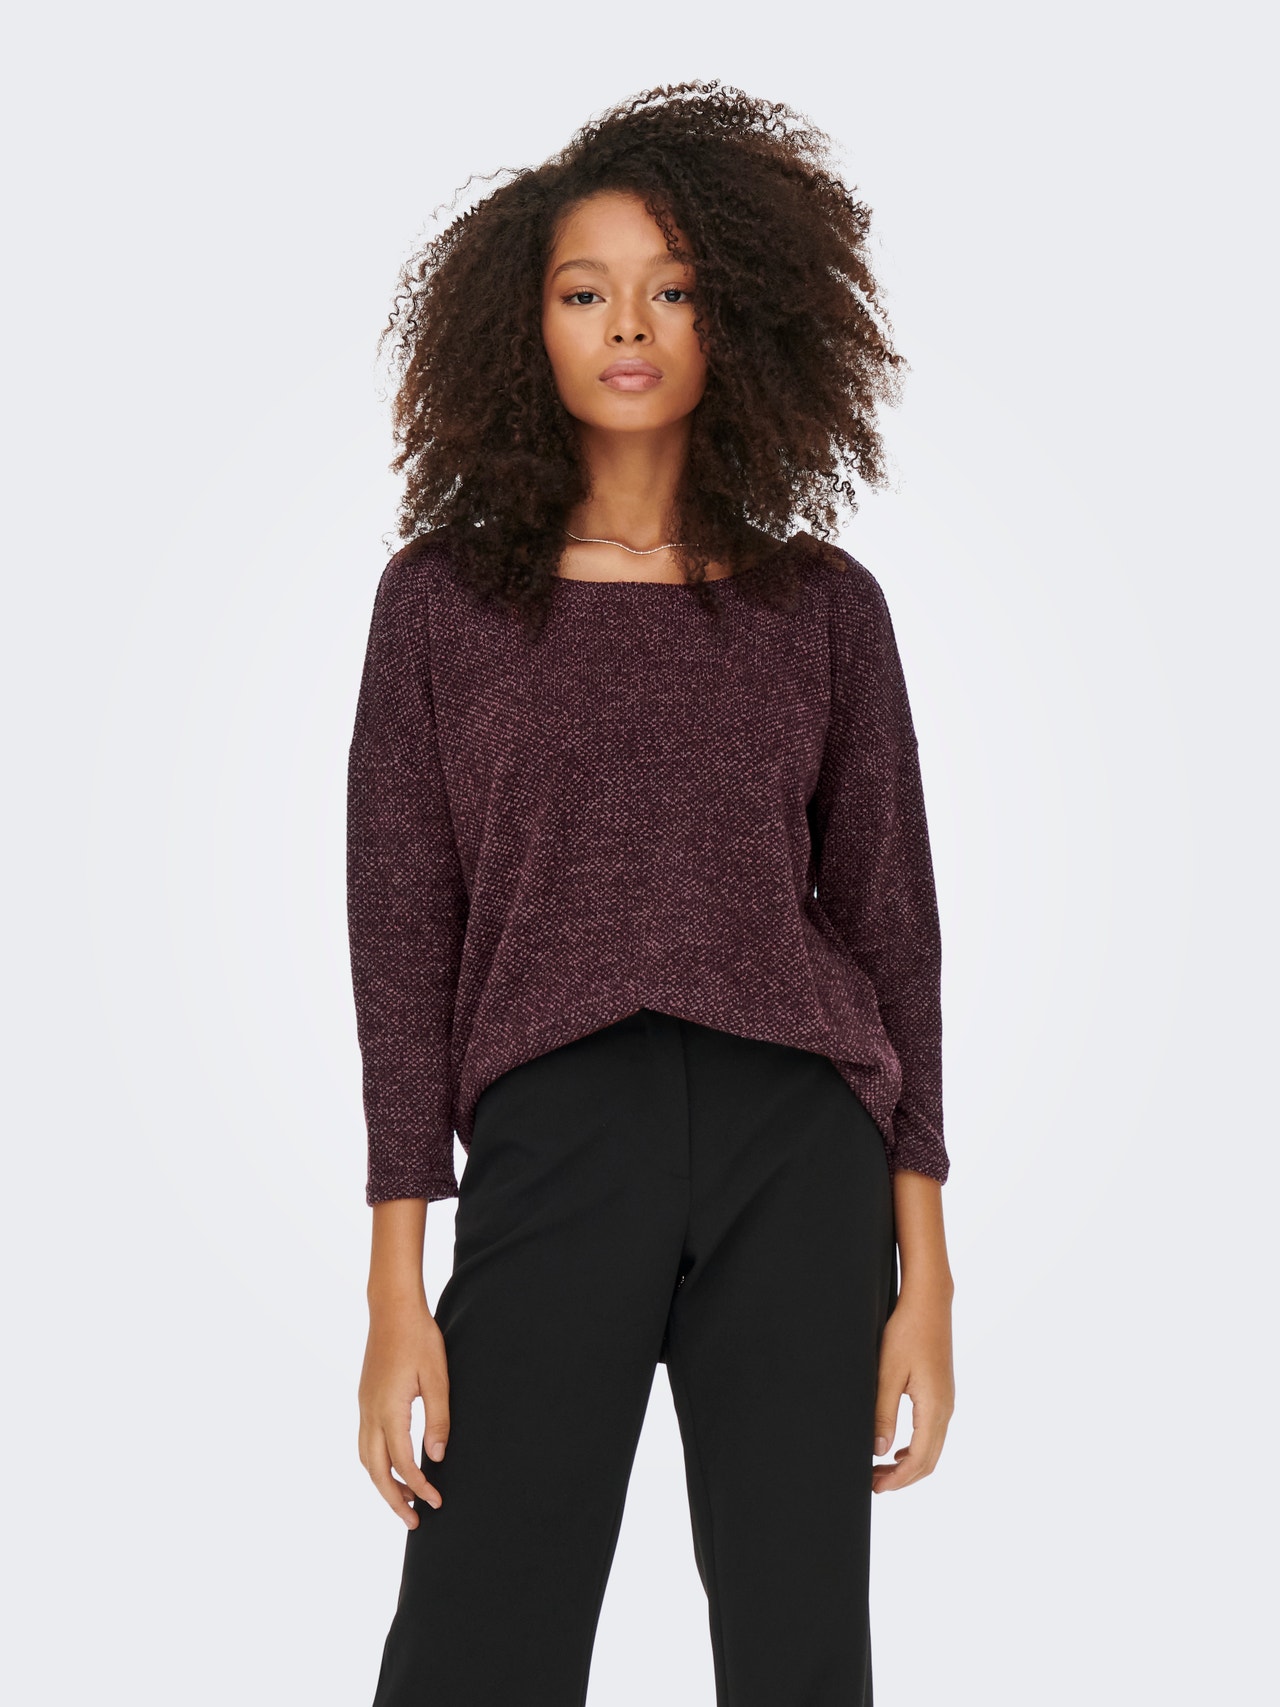 ONLY Oversize 3/4 sleeved top -Winetasting - 15177776